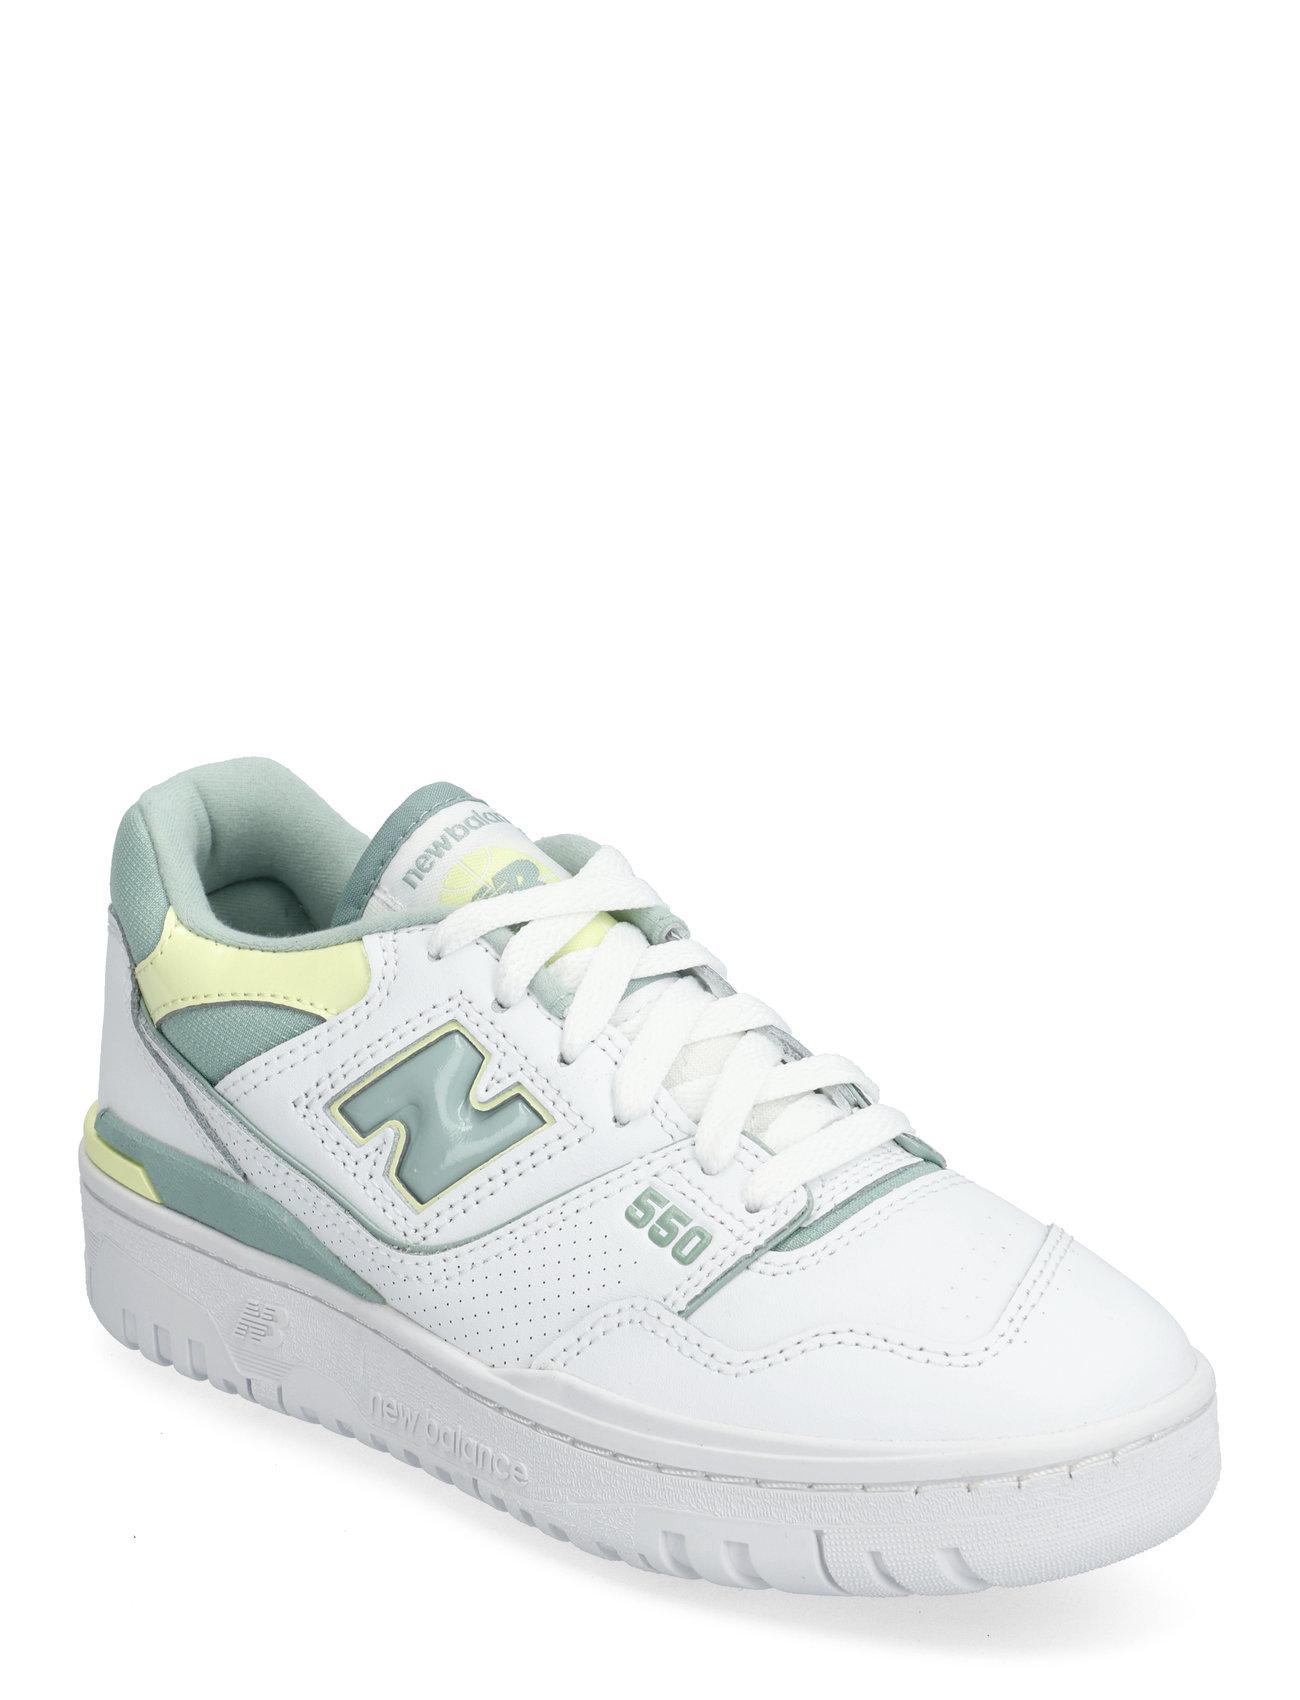 New Balance Bbw550 Sport Sneakers Low-top Sneakers White New Balance